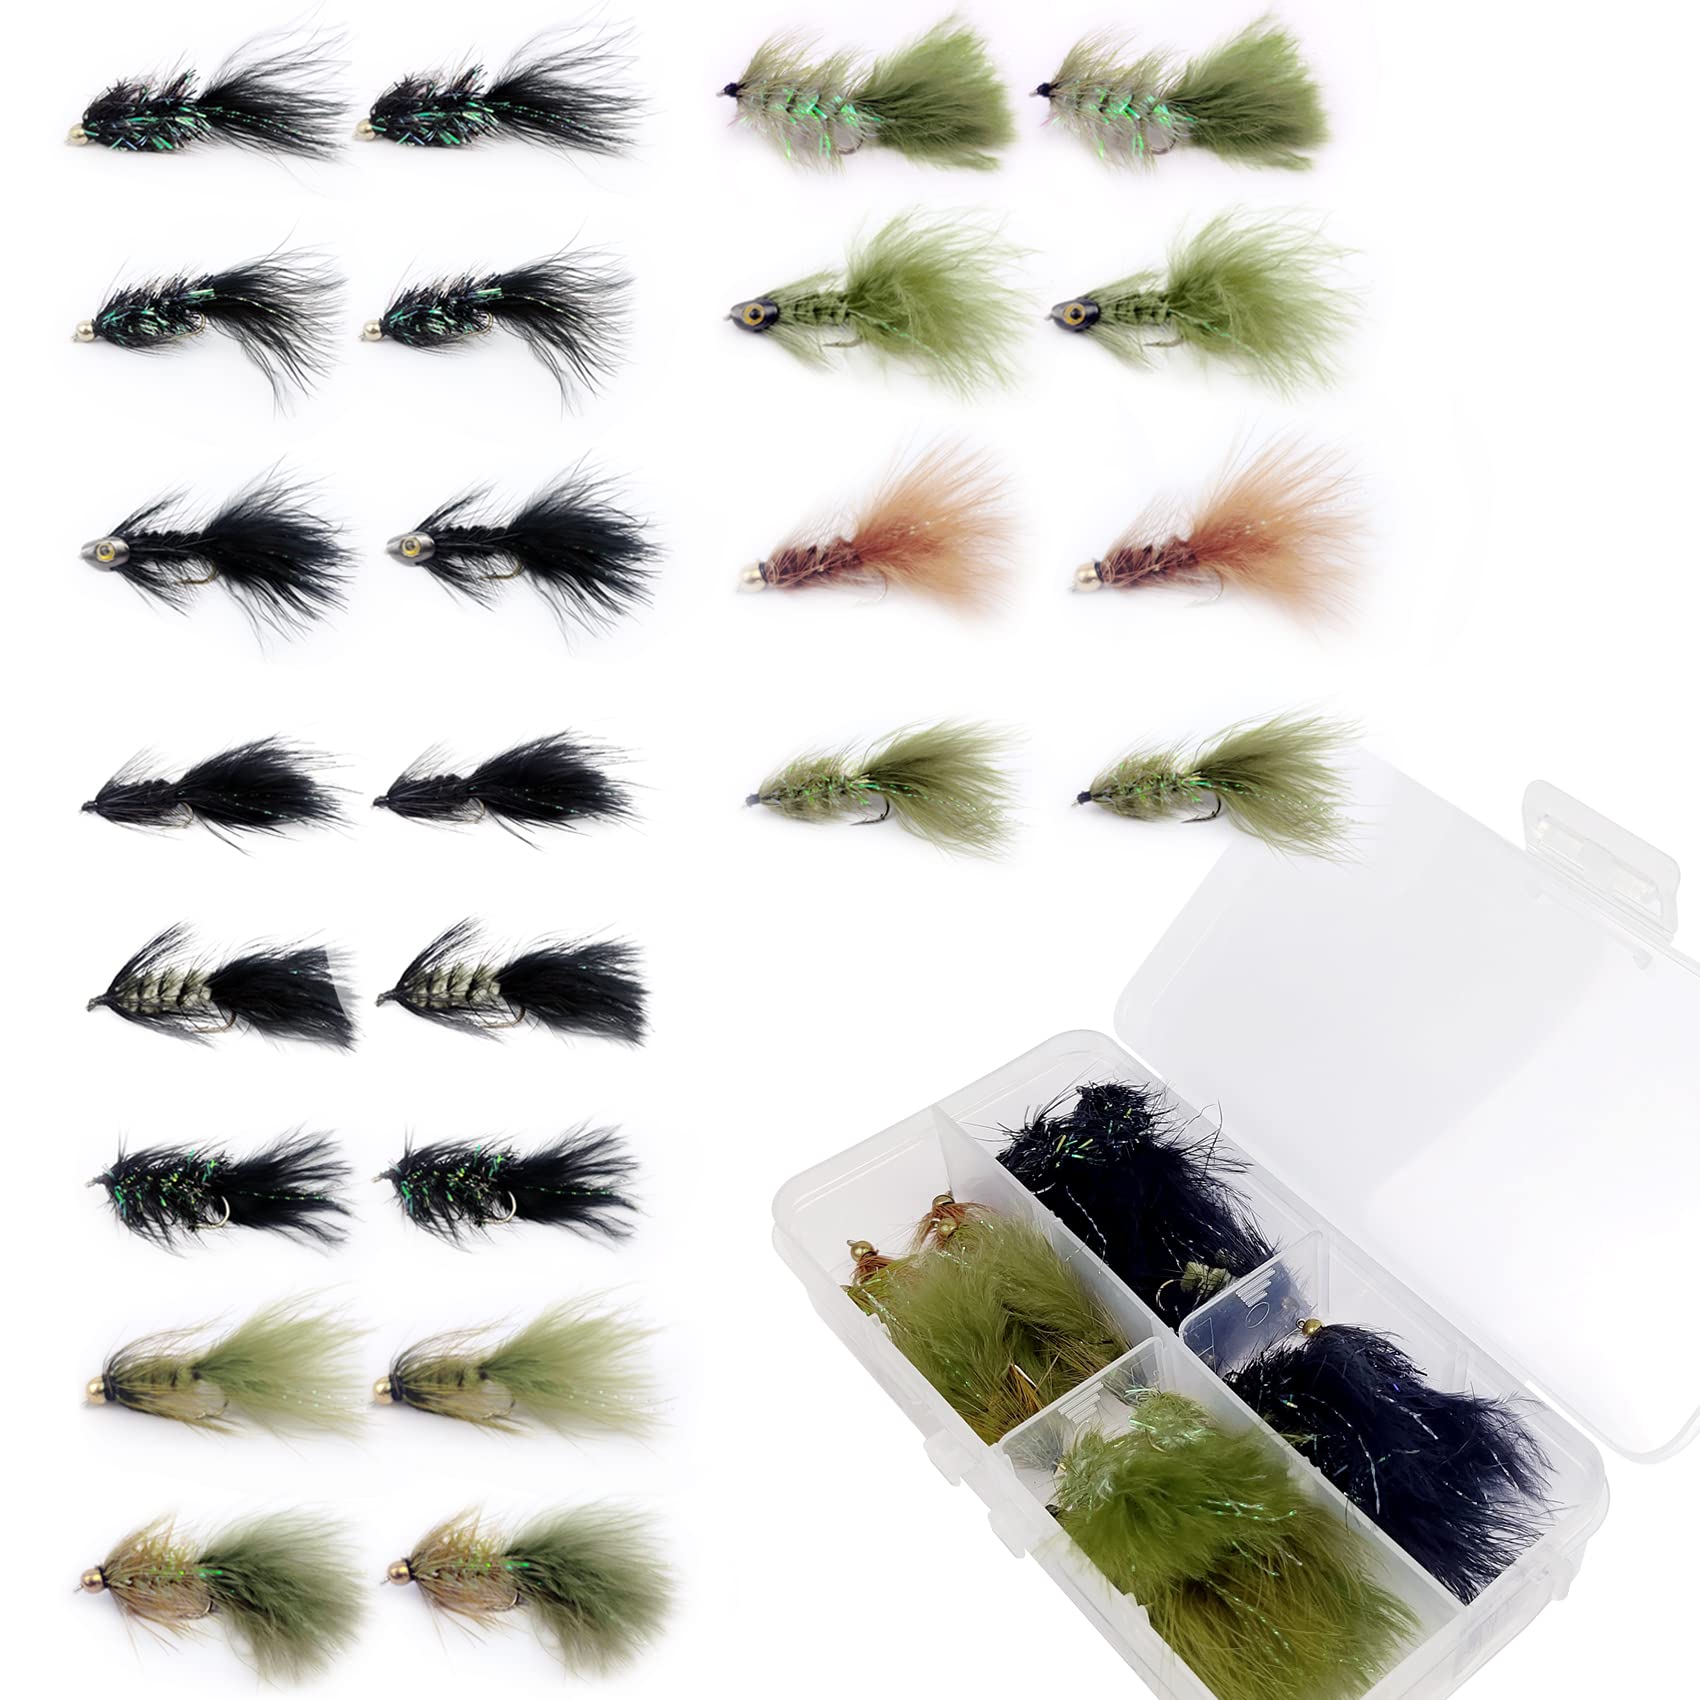 Fly Fishing Flies Assortment Saltwater Flies Handmade Fly Fishing Lures Wet  Flies Streamer Saltwater Flies for Trout 24pc Ba 12 Woolybuggers Collection